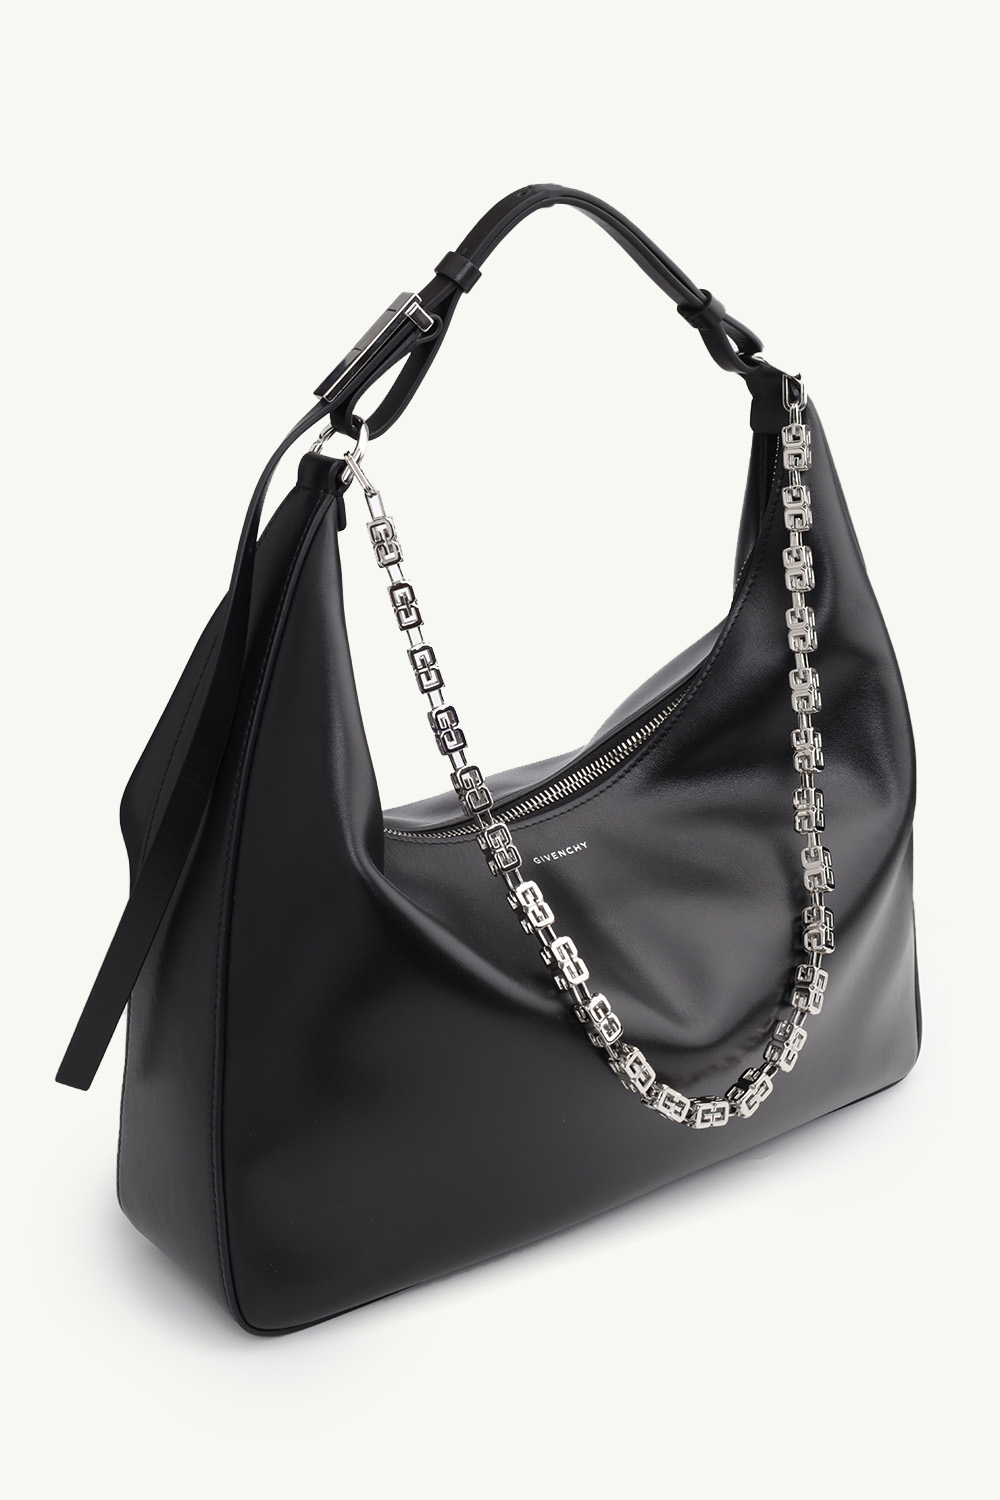 GIVENCHY Medium Moon Cut Out Bag in Black Smooth Leather 2